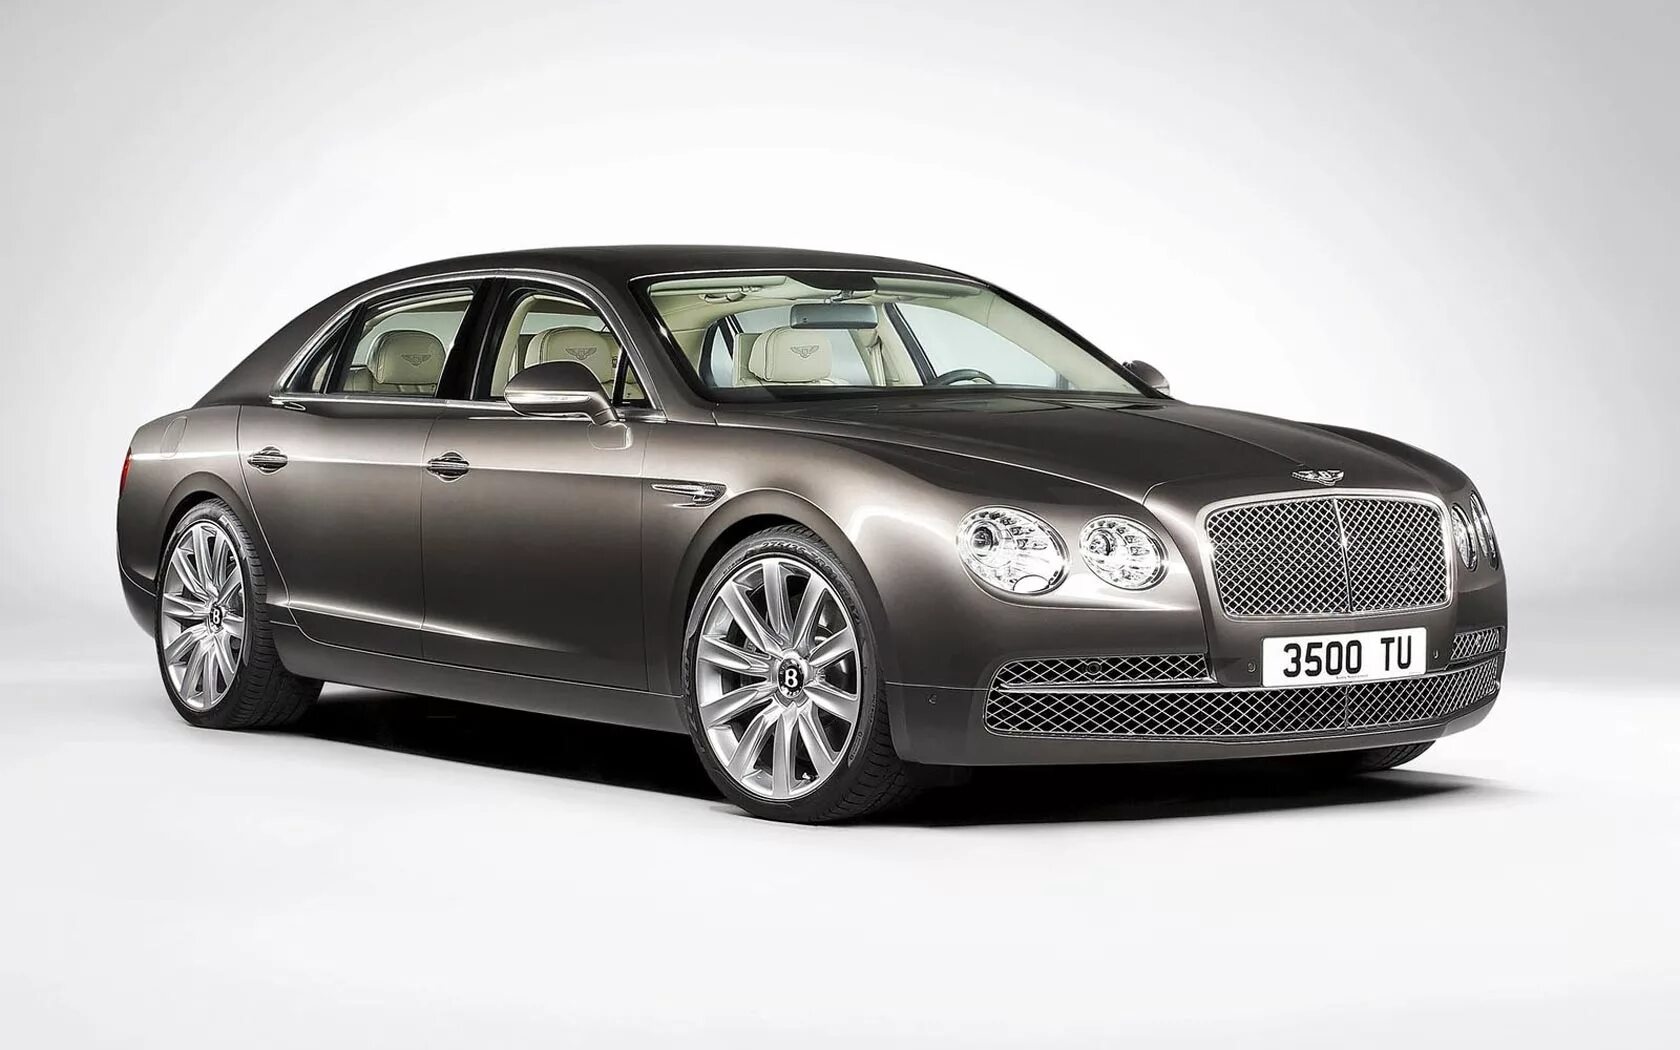 Бентли continental flying spur. 2013 Bentley Continental Flying Spur. Bentley Flying Spur 2010. Бентли Flying Spur 2014.